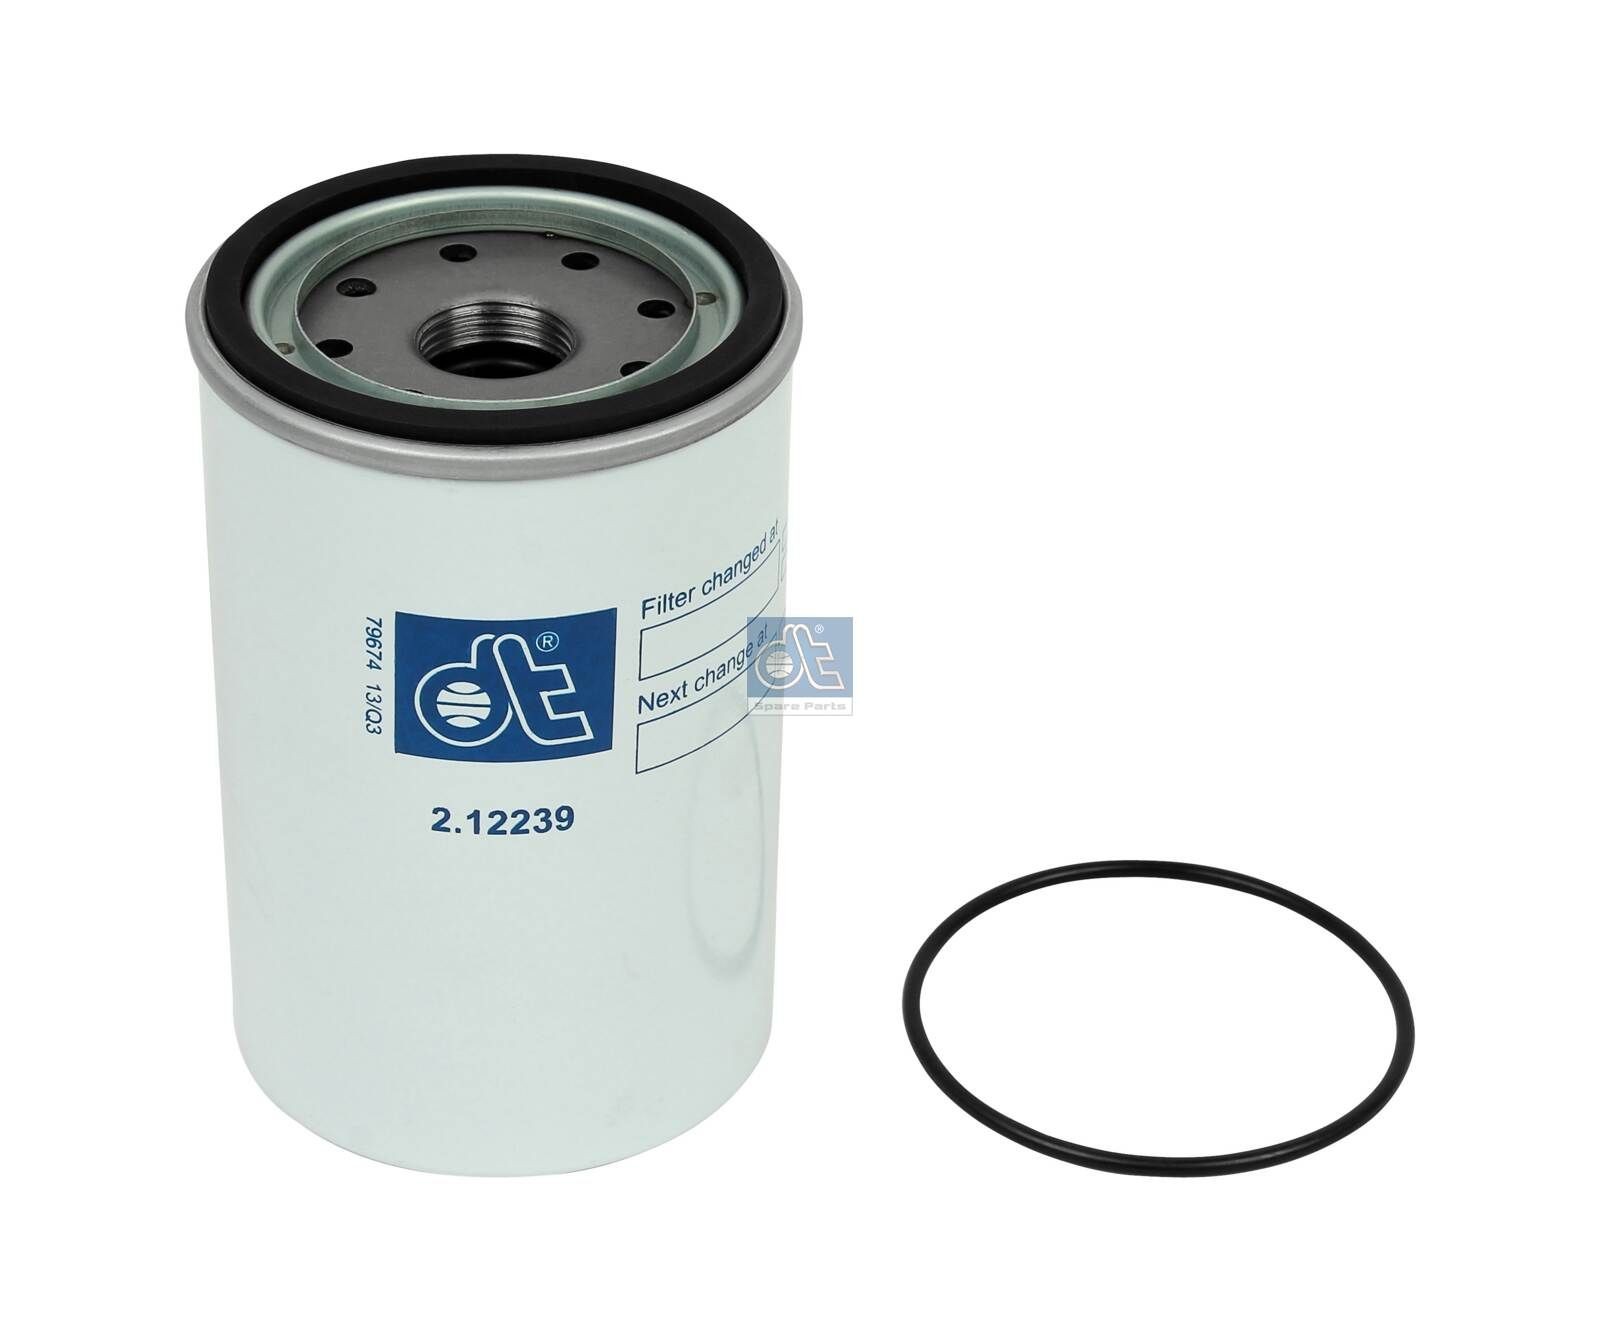 WK 940/33 x DT Spare Parts 2.12239 Fuel filter 7 420 541 383